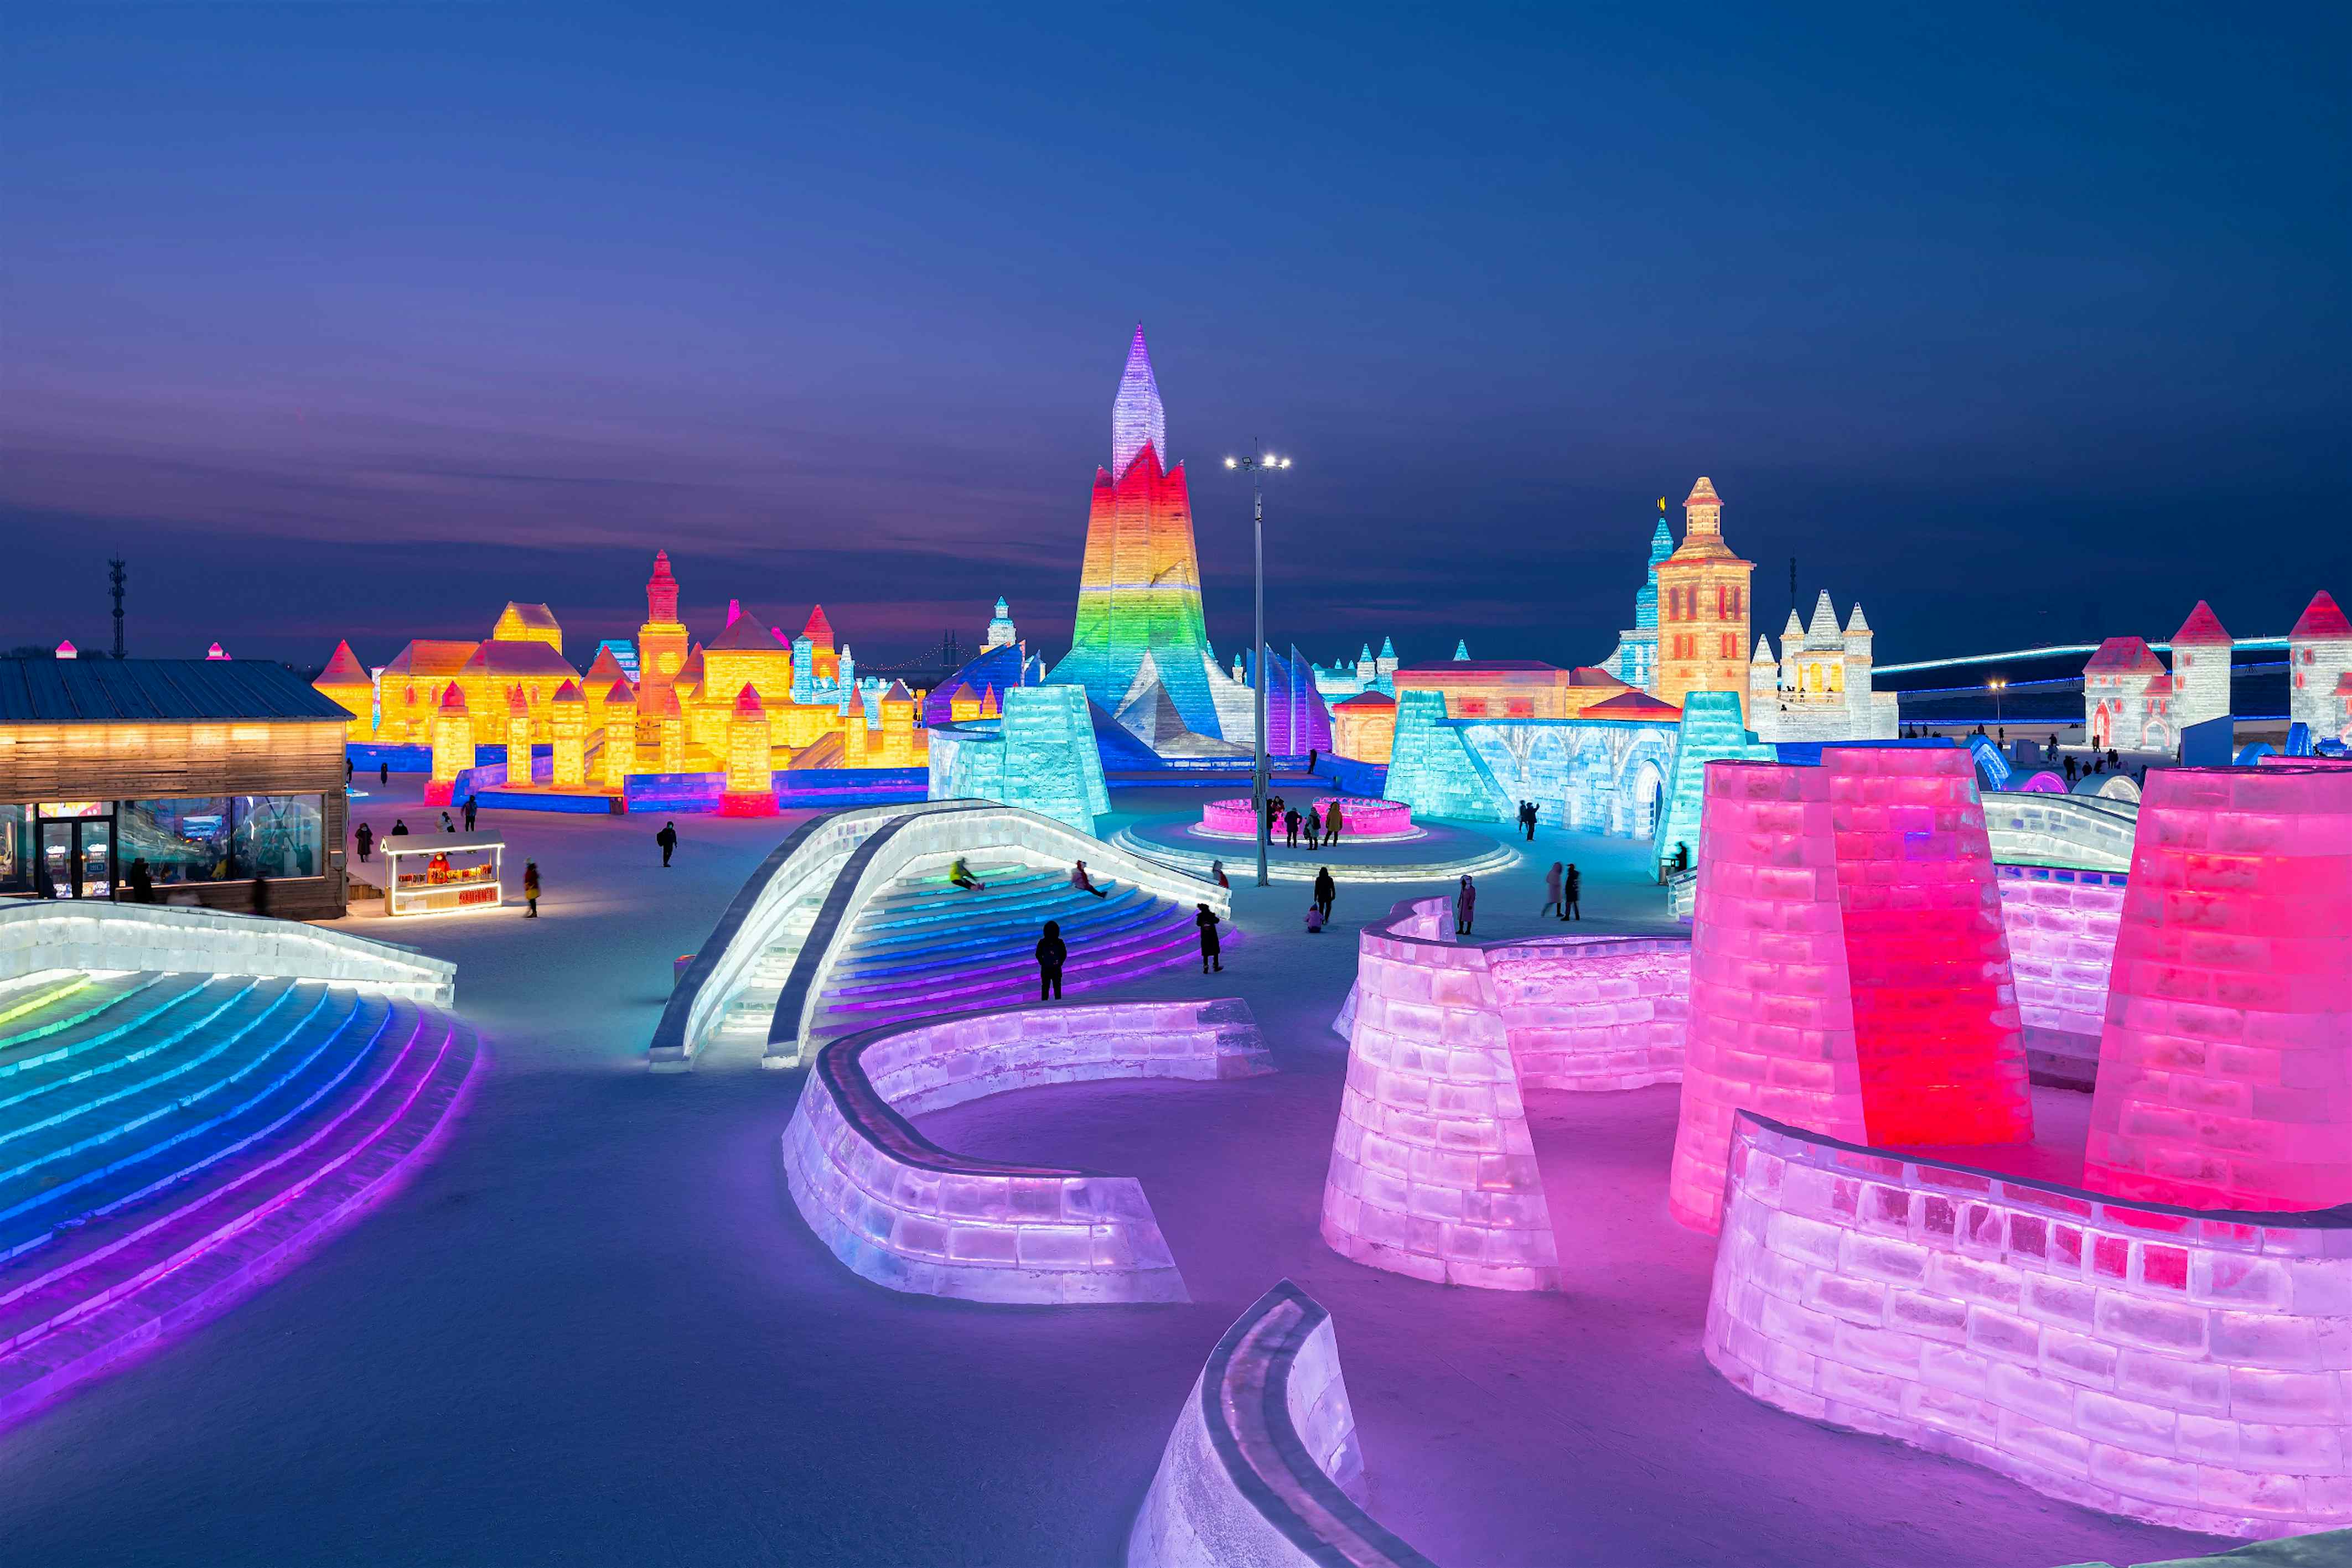 China’s famous Harbin Snow and Ice Festival goes ahead with COVID